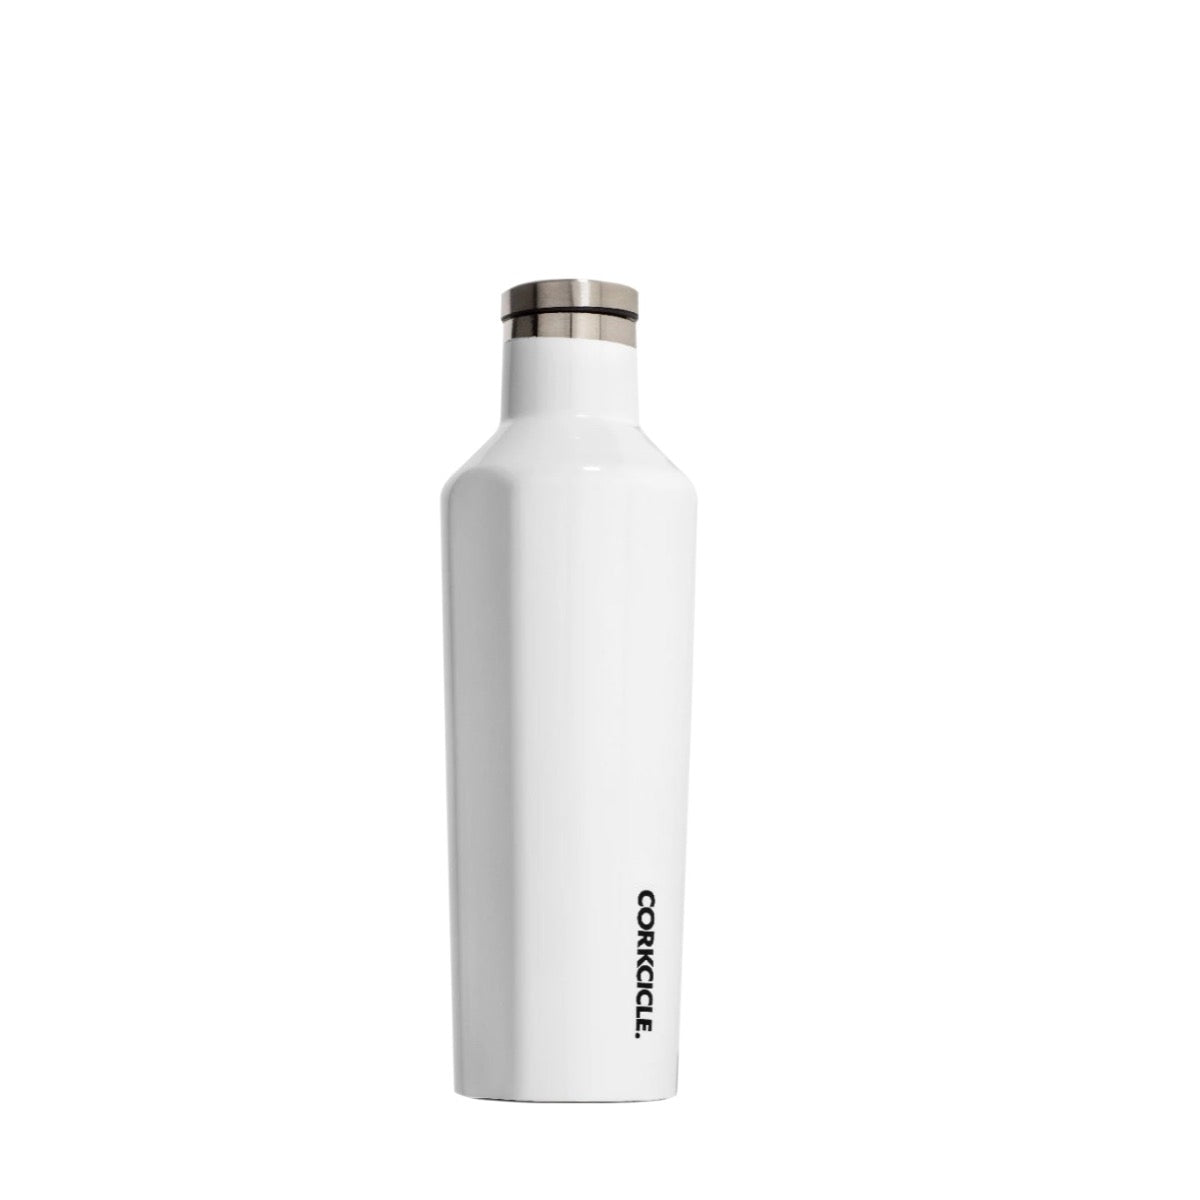 Corkcicle Classic Canteen 475ml - White - Insulated Stainless Steel Bottle